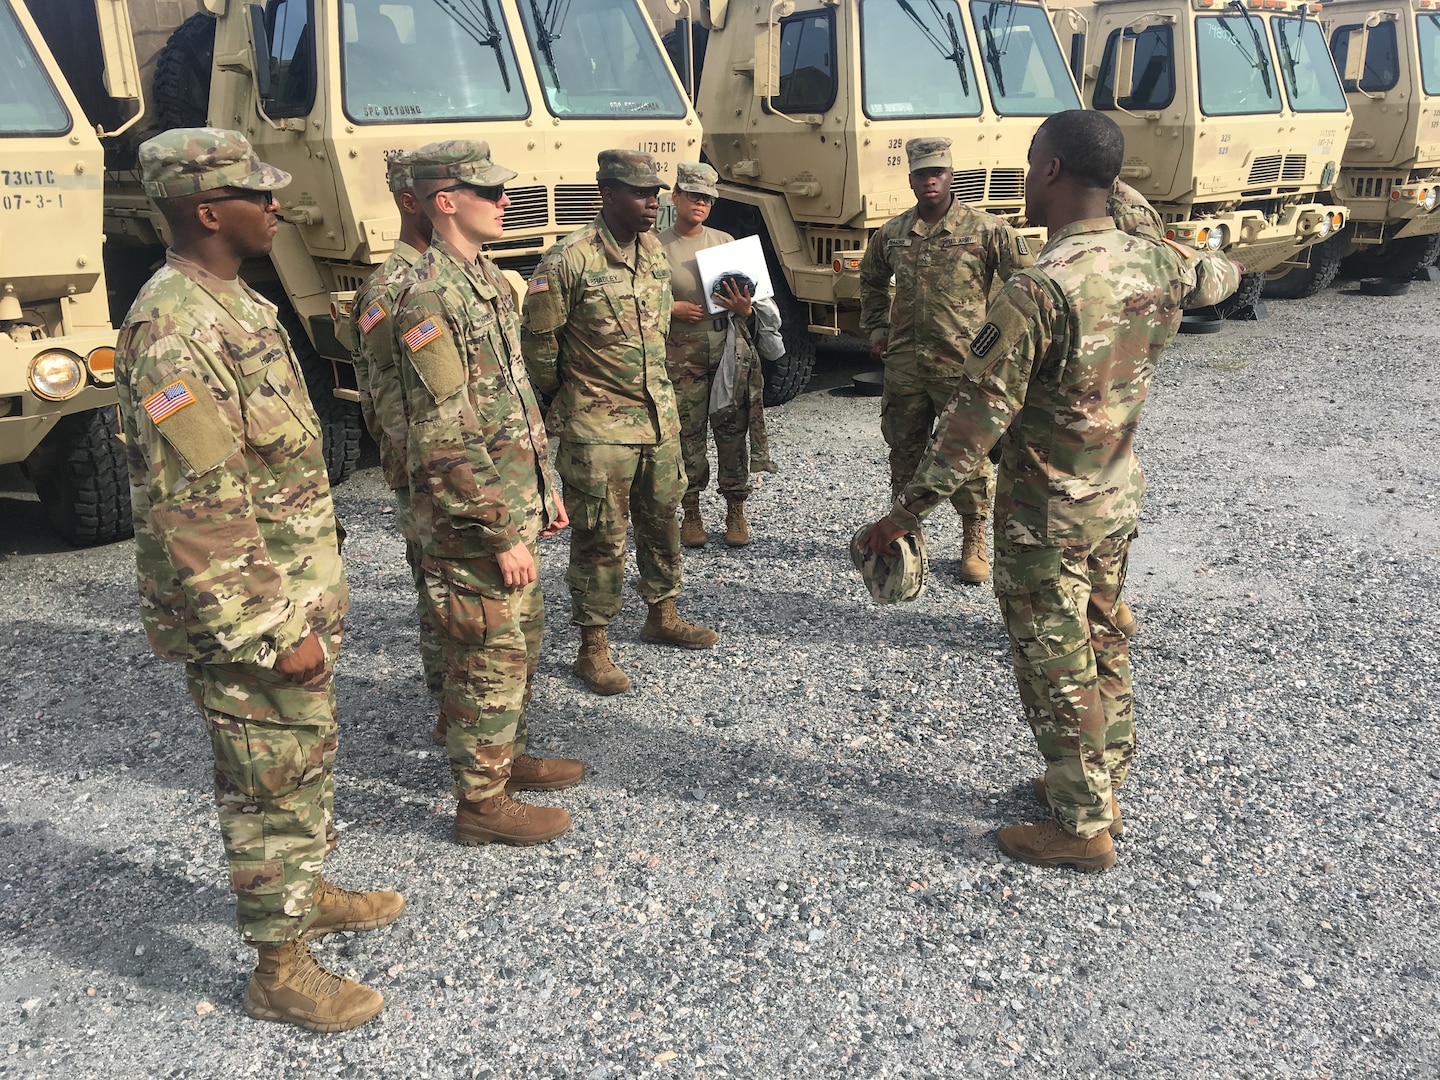 Virginia National Guard Soldiers assigned to the Virginia Beach-based 1173rd Transportation Company, 1030th Transportation Battalion, 329th Regional Support Group conduct maintenance checks on their tactical trucks to prepare for possible Hurricane Dorian response operations Sept. 4, 2019, in Virginia Beach, Virginia.